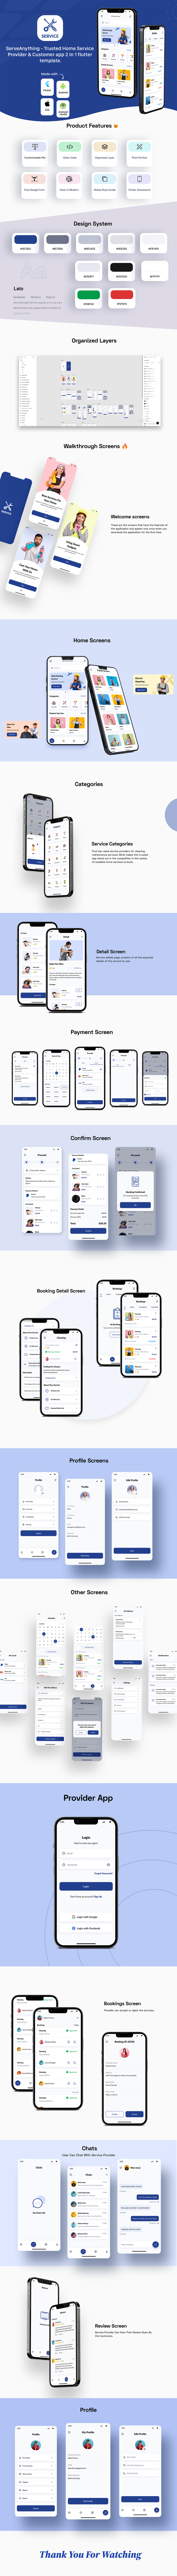 Serve Anything - Trusted Home Service Provider and Customer app 2 in 1 flutter template - 5